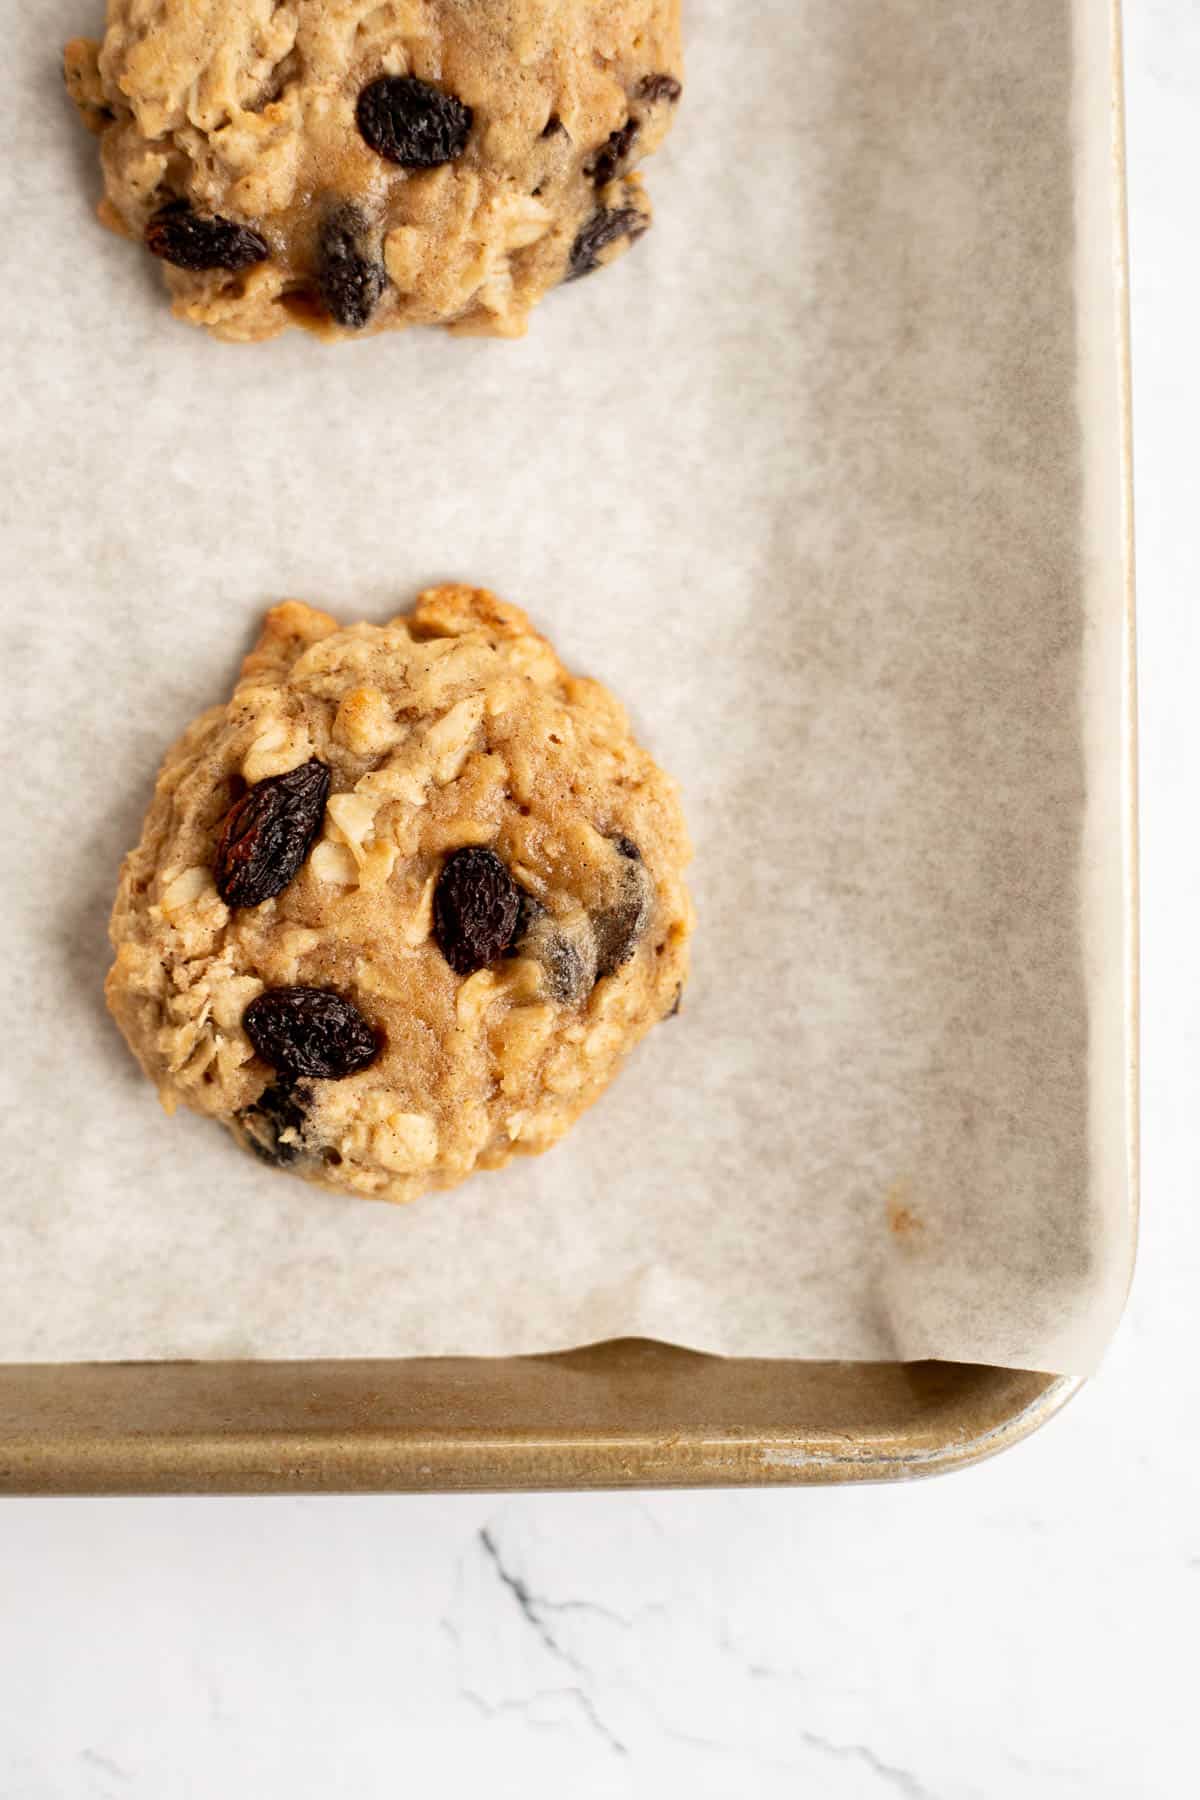 baked oatmeal raisin cookies without eggs on a parchment paper.